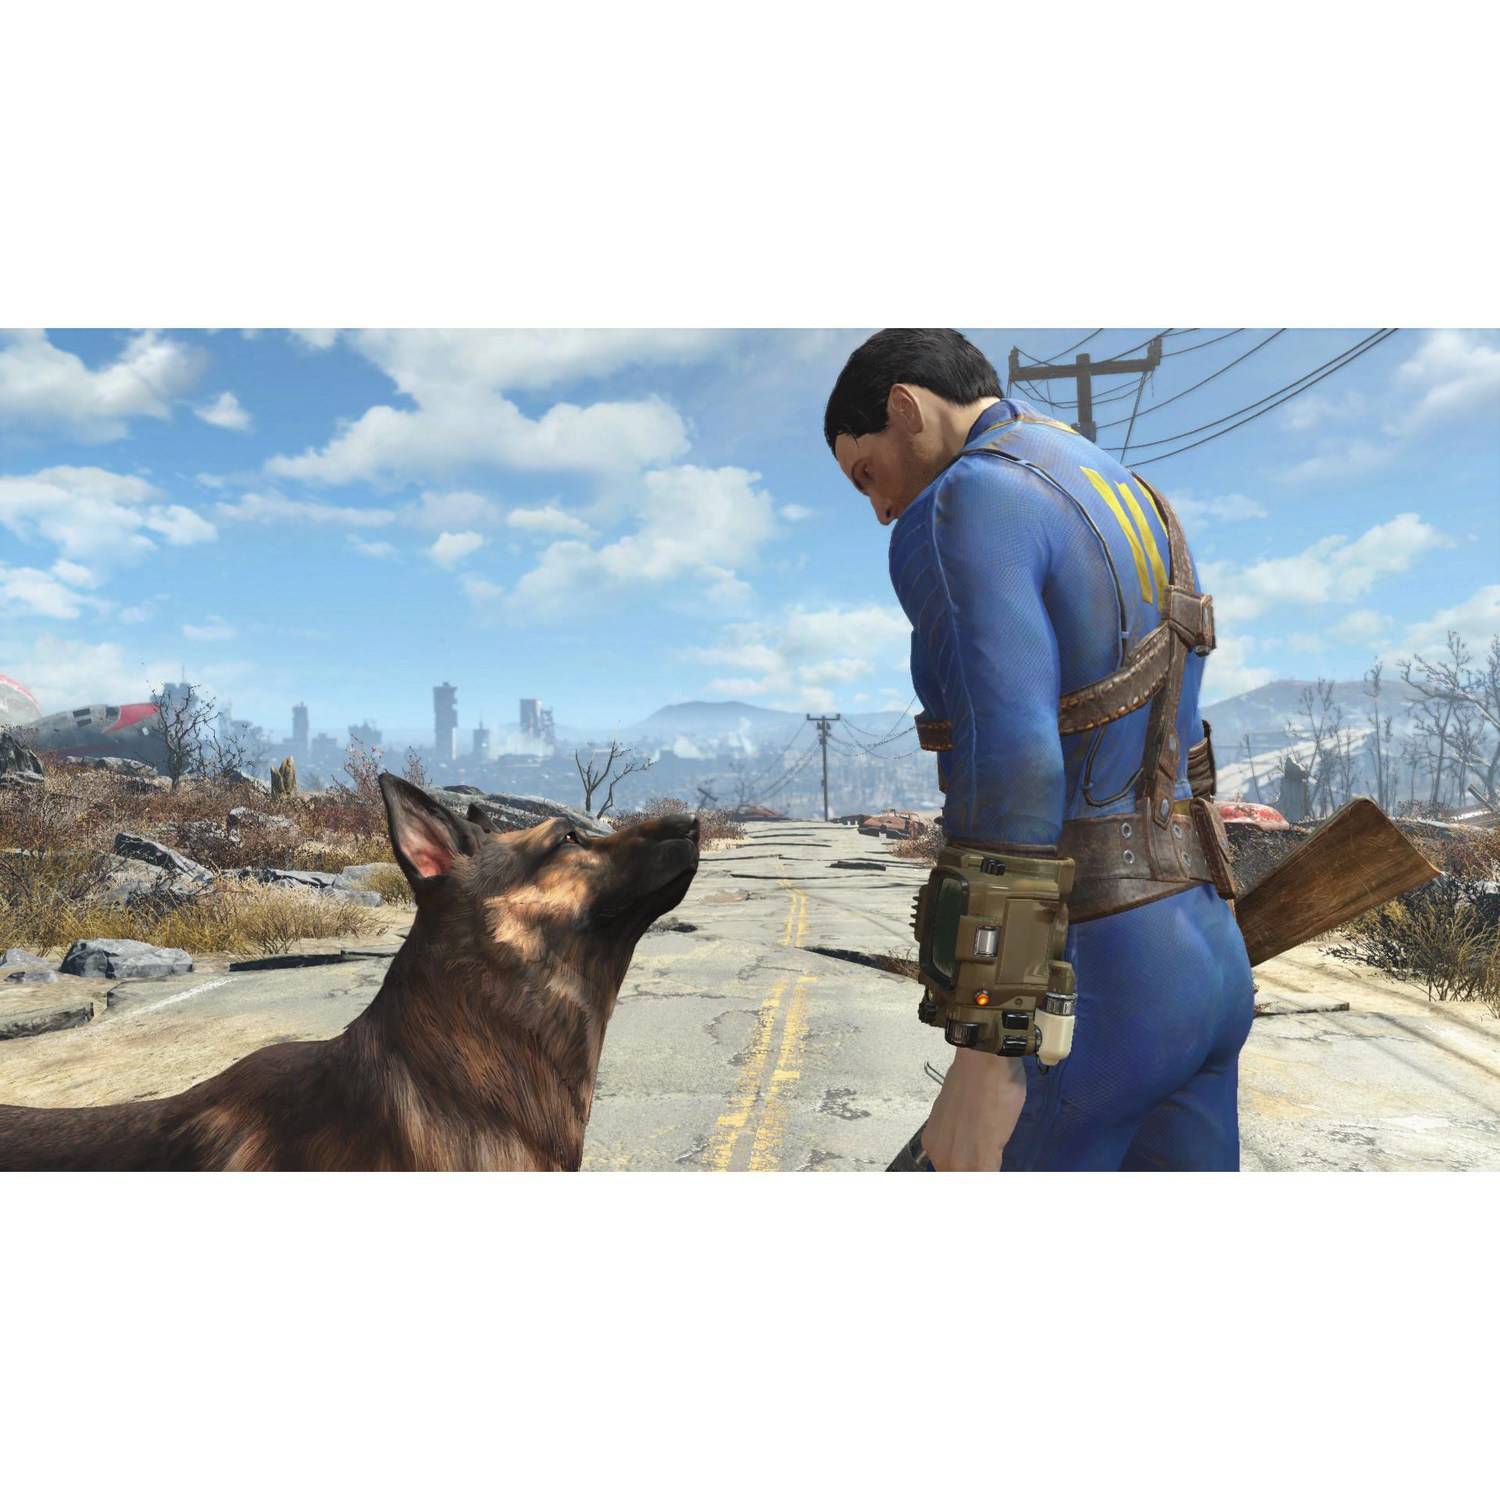 Fallout 4, Bethesda Softworks, PlayStation 4, [Physical], 093155170414 - image 4 of 9